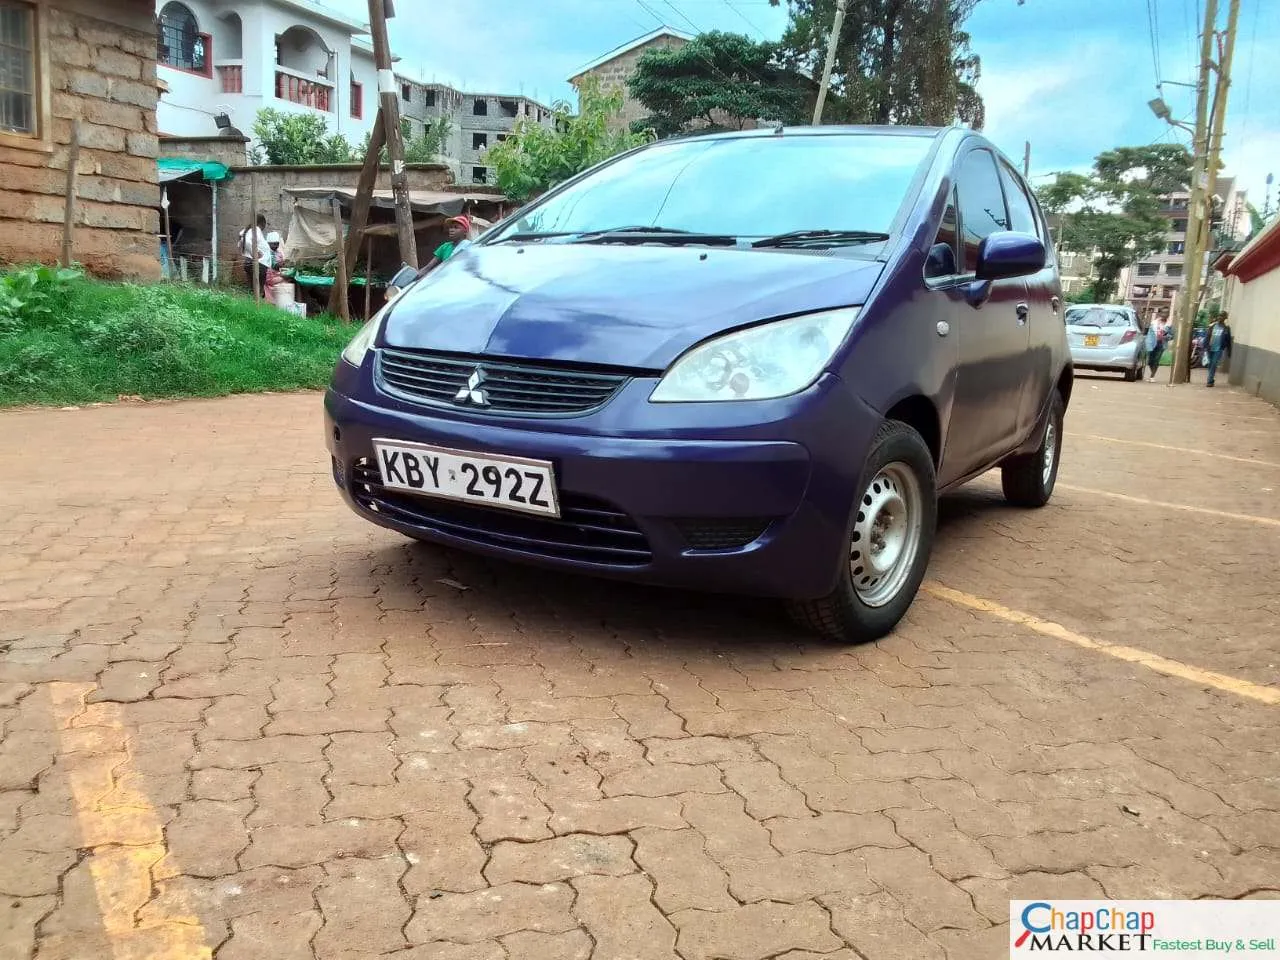 Mitsubishi Colt kenya QUICKEST SALE You Pay 30% Pay Deposit Trade in Ok Mitsubishi colt for sale in kenya hire purchase installments EXCLUSIVE (SOLD)